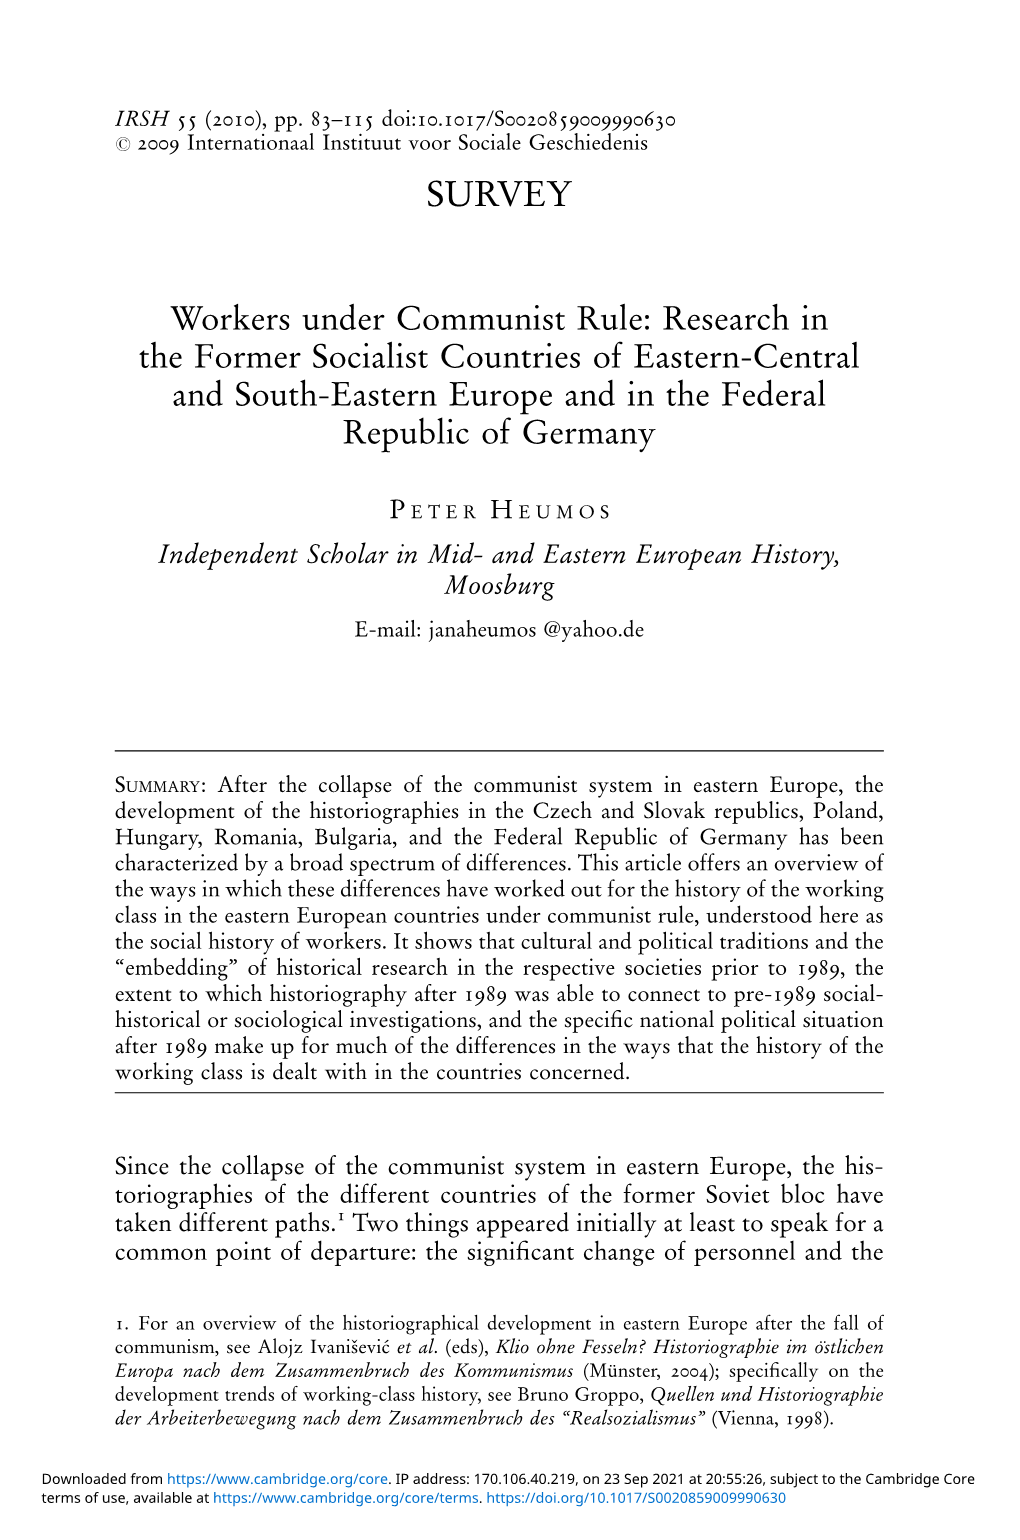 Workers Under Communist Rule: Research in the Former Socialist Countries of Eastern-Central and South-Eastern Europe and in the Federal Republic of Germany